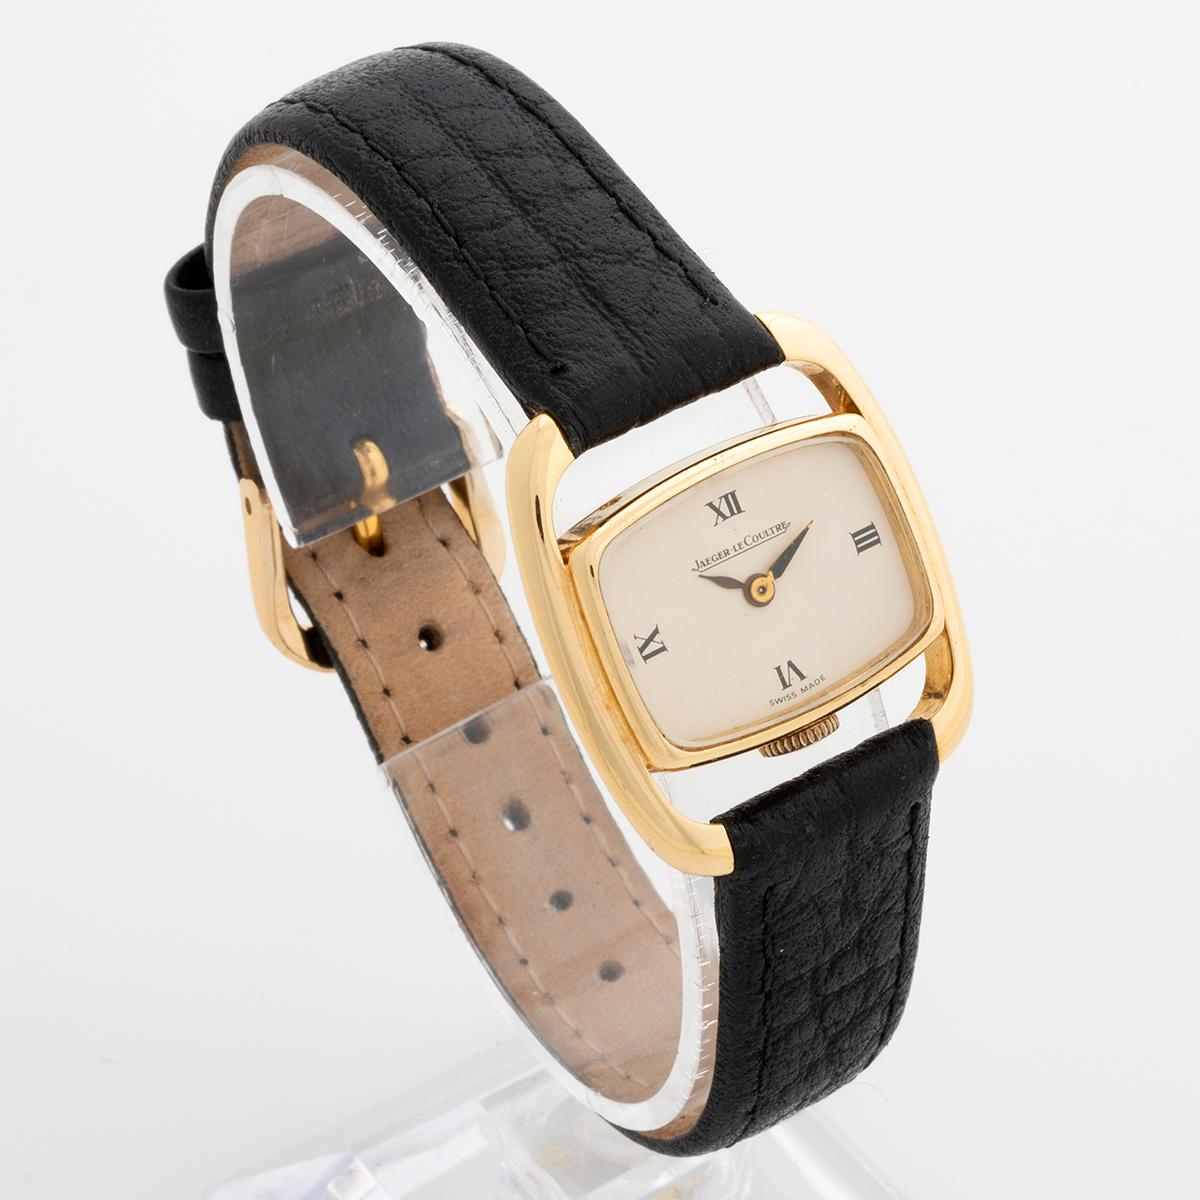 Our vintage and rare manually wound Jaeger-LeCoultre ladies Etrier features an 18k yellow gold case (25 x 28mm) and is fitted with a quality leather strap and tang buckle. We date our Jaeger-LeCoultre to c.1970. Etrier references are famed for their